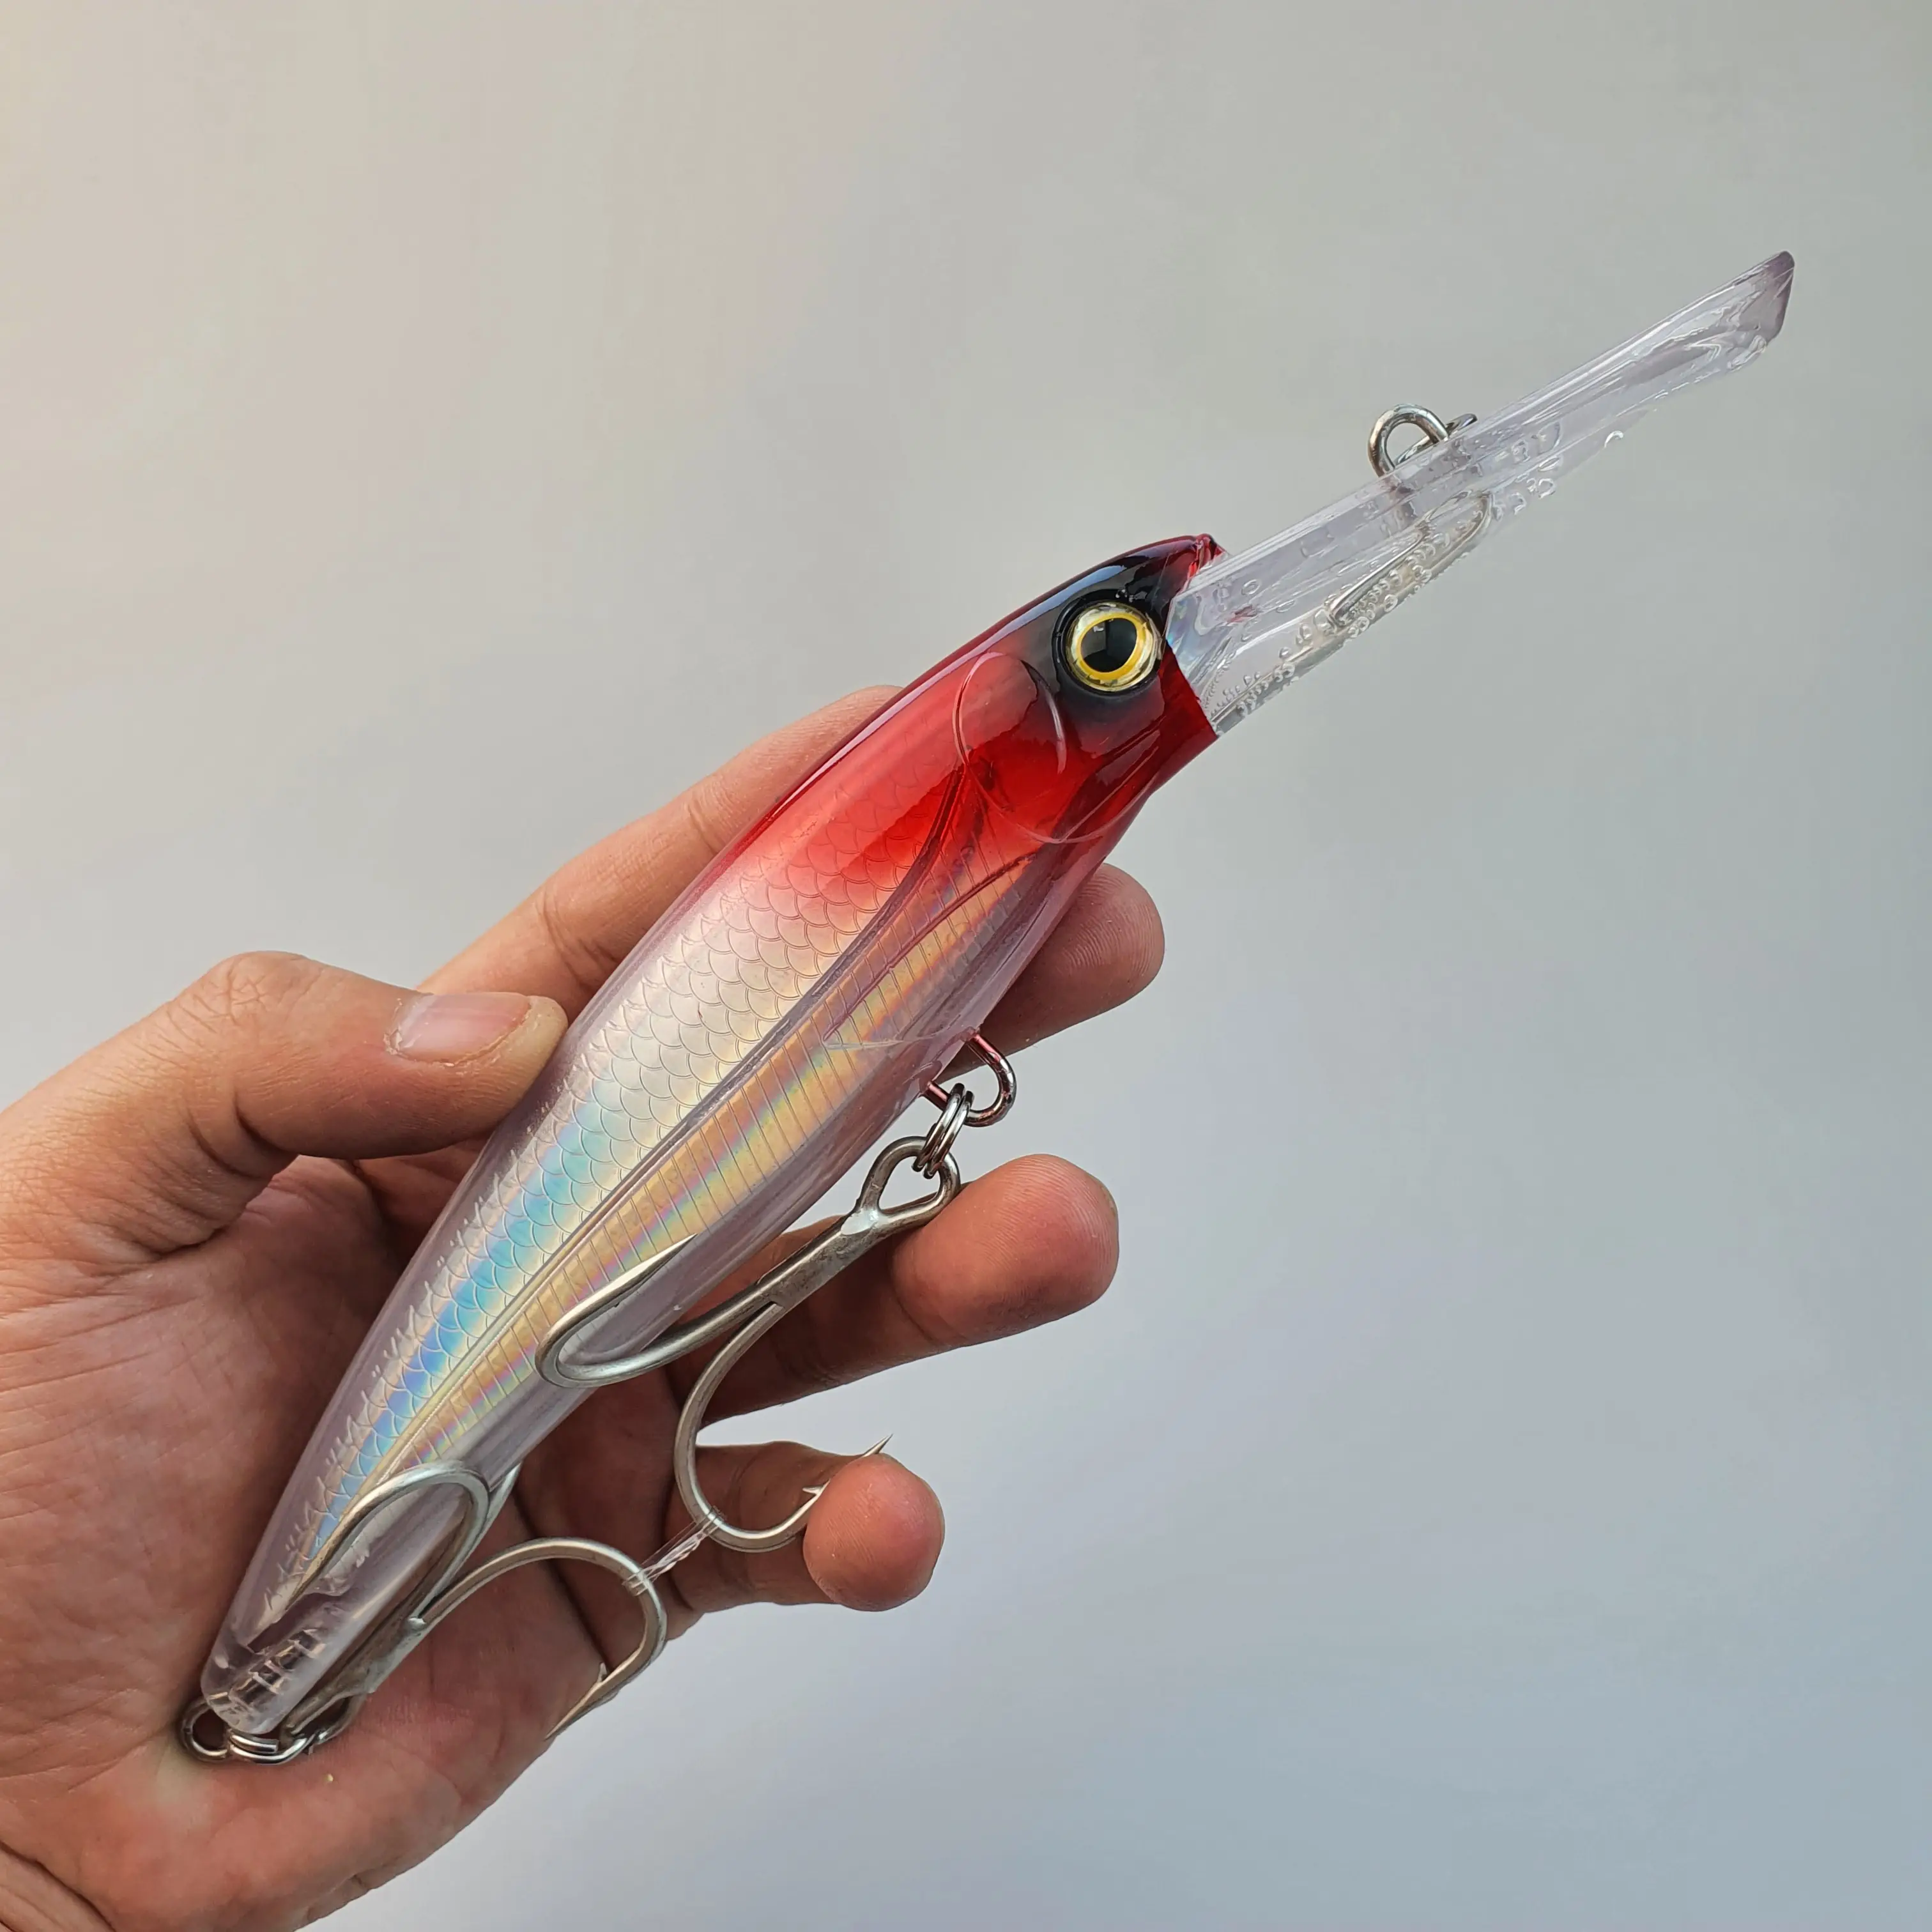 Big Game 160mm/70g Deep Diving Minnow Fishing Lures Hard ABS Plastic Artificial Jerk Baits Trolling Fishing Lures